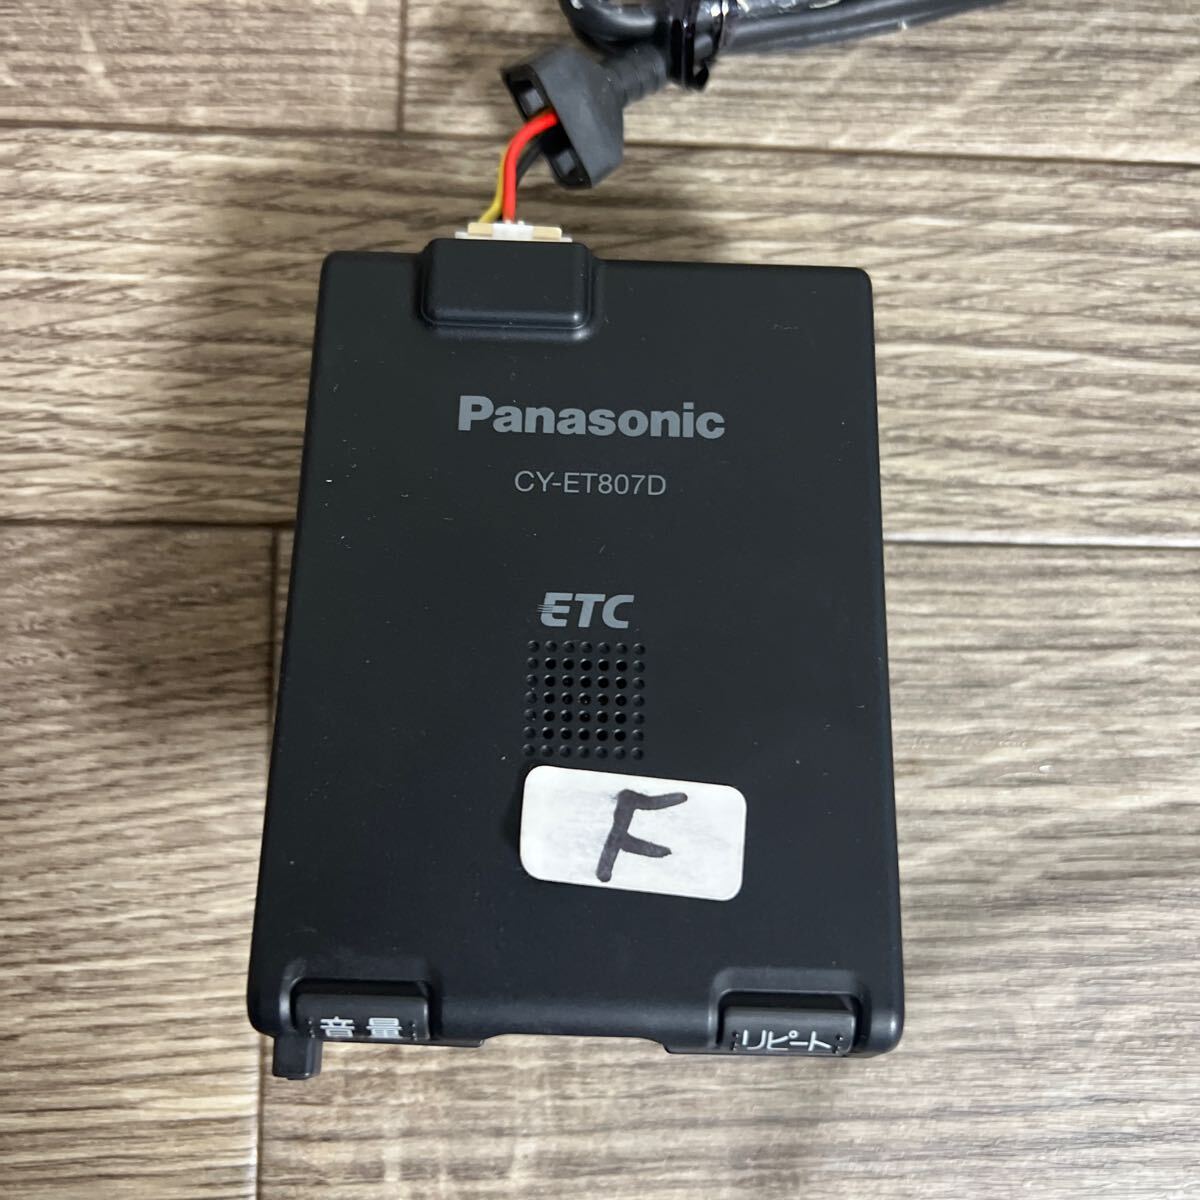 ETC Panasonic CY-ET807D normal car from out did secondhand goods. antenna one body normal car setup )